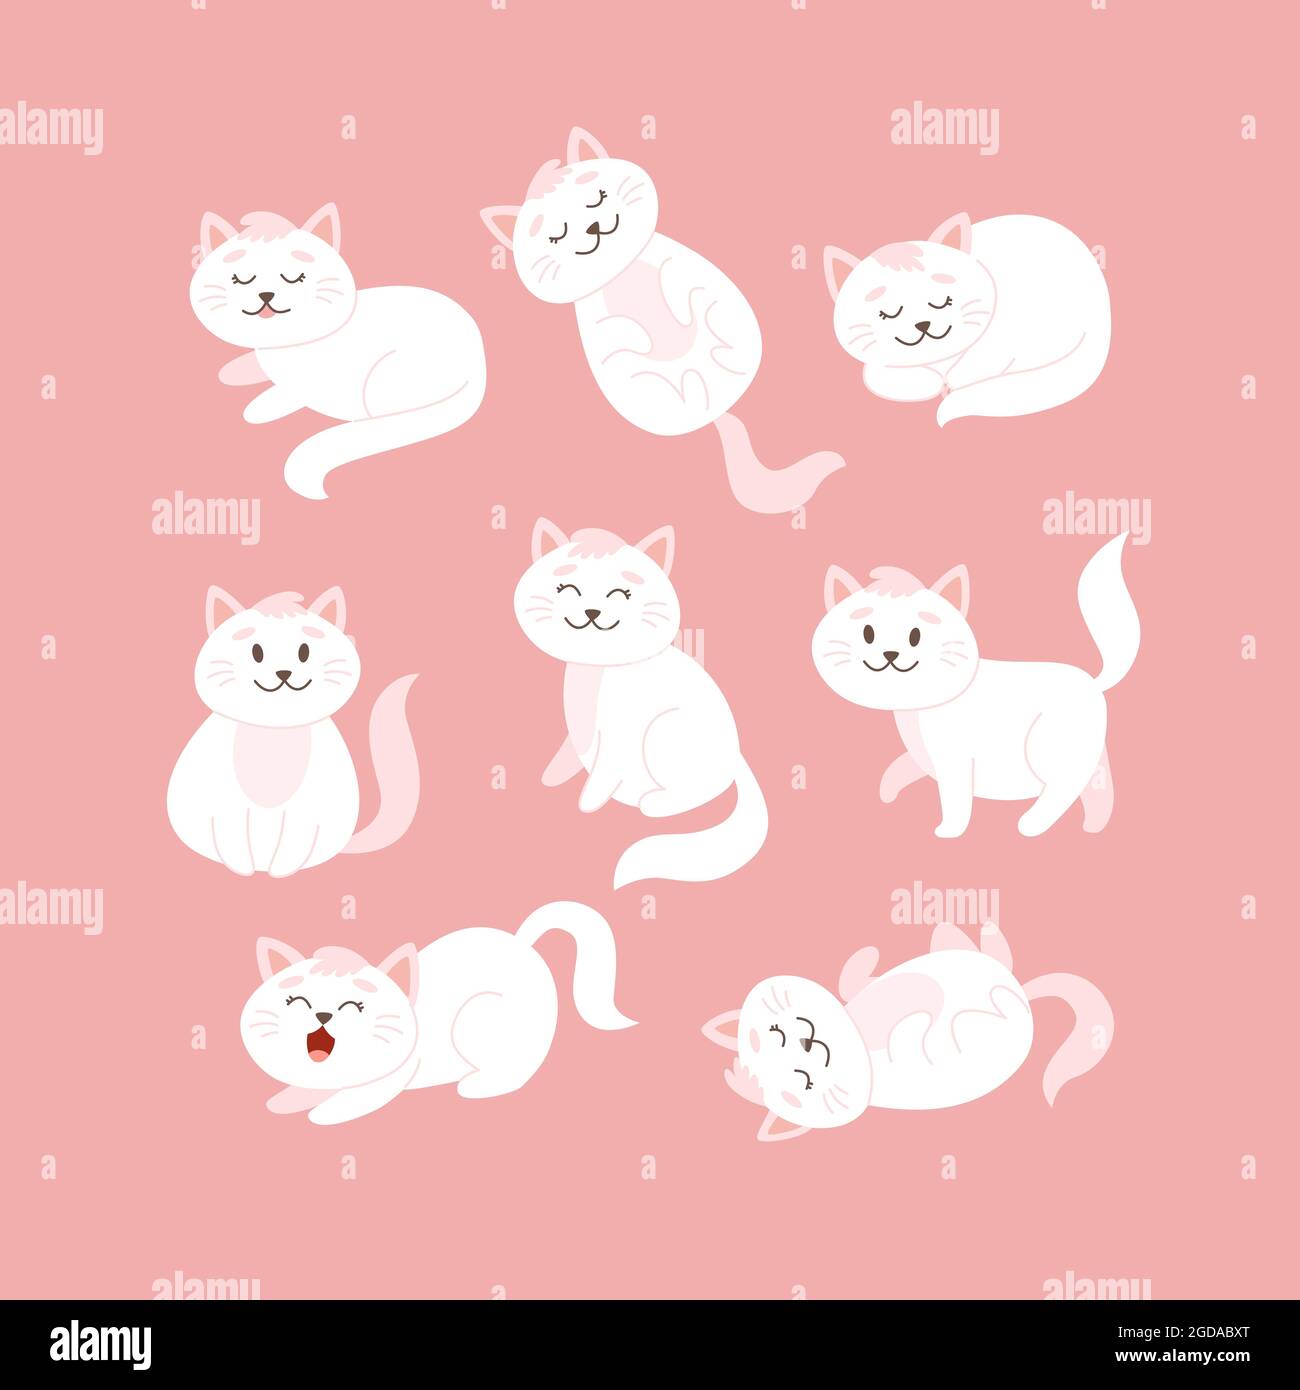 Cat set in different poses. Cute white cat character in cartoon style, vector illustration Stock Vector